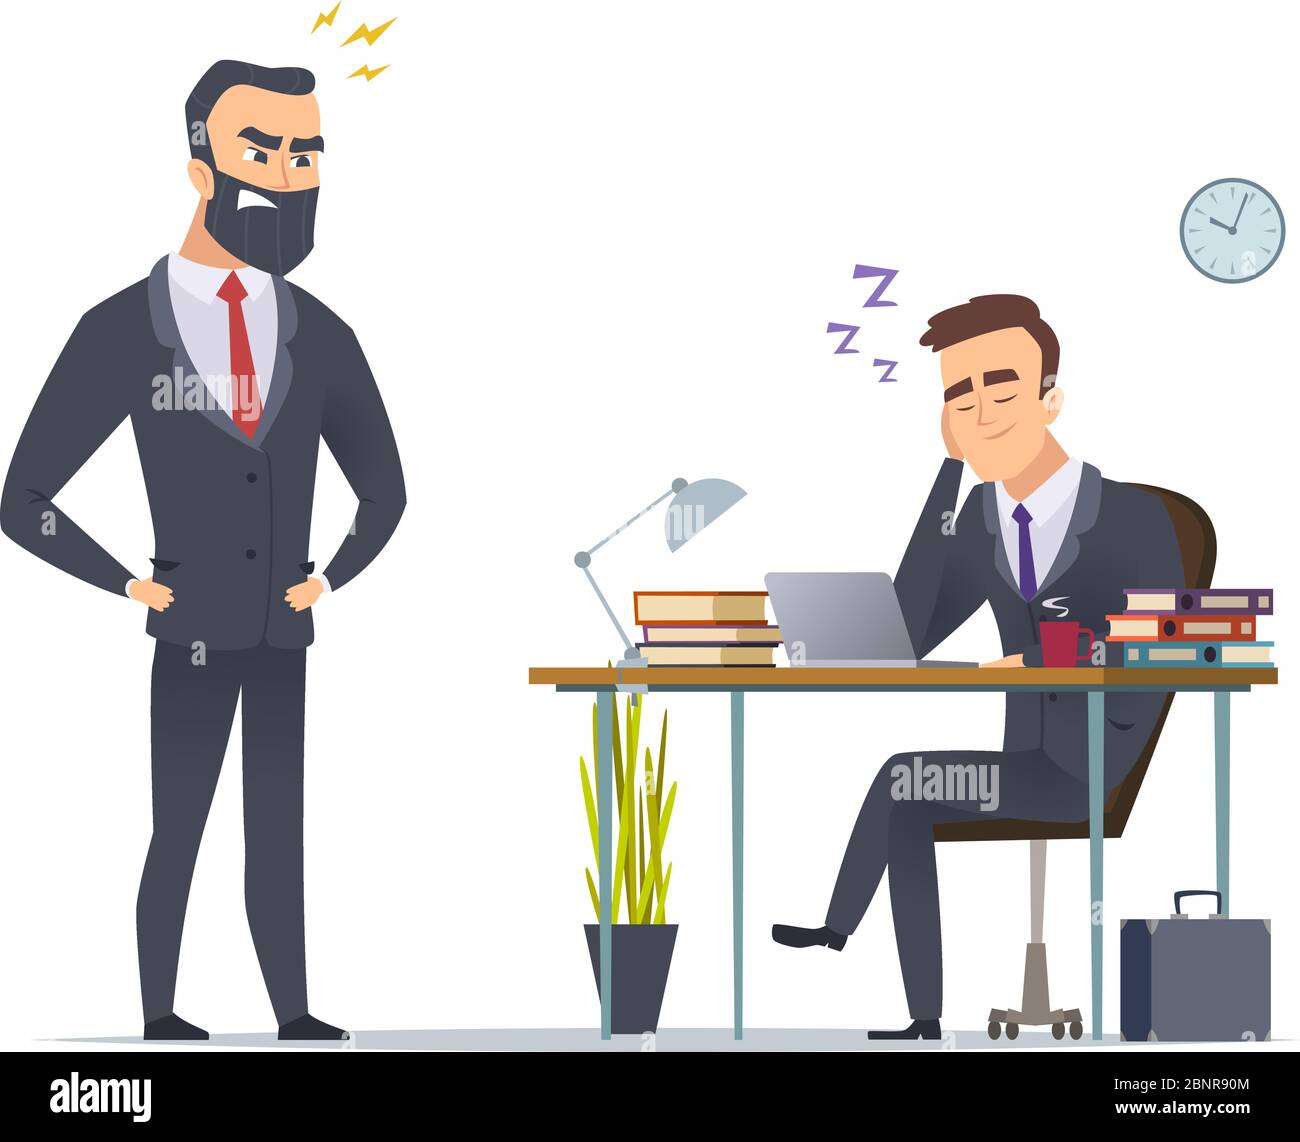 lazy person at work cartoon